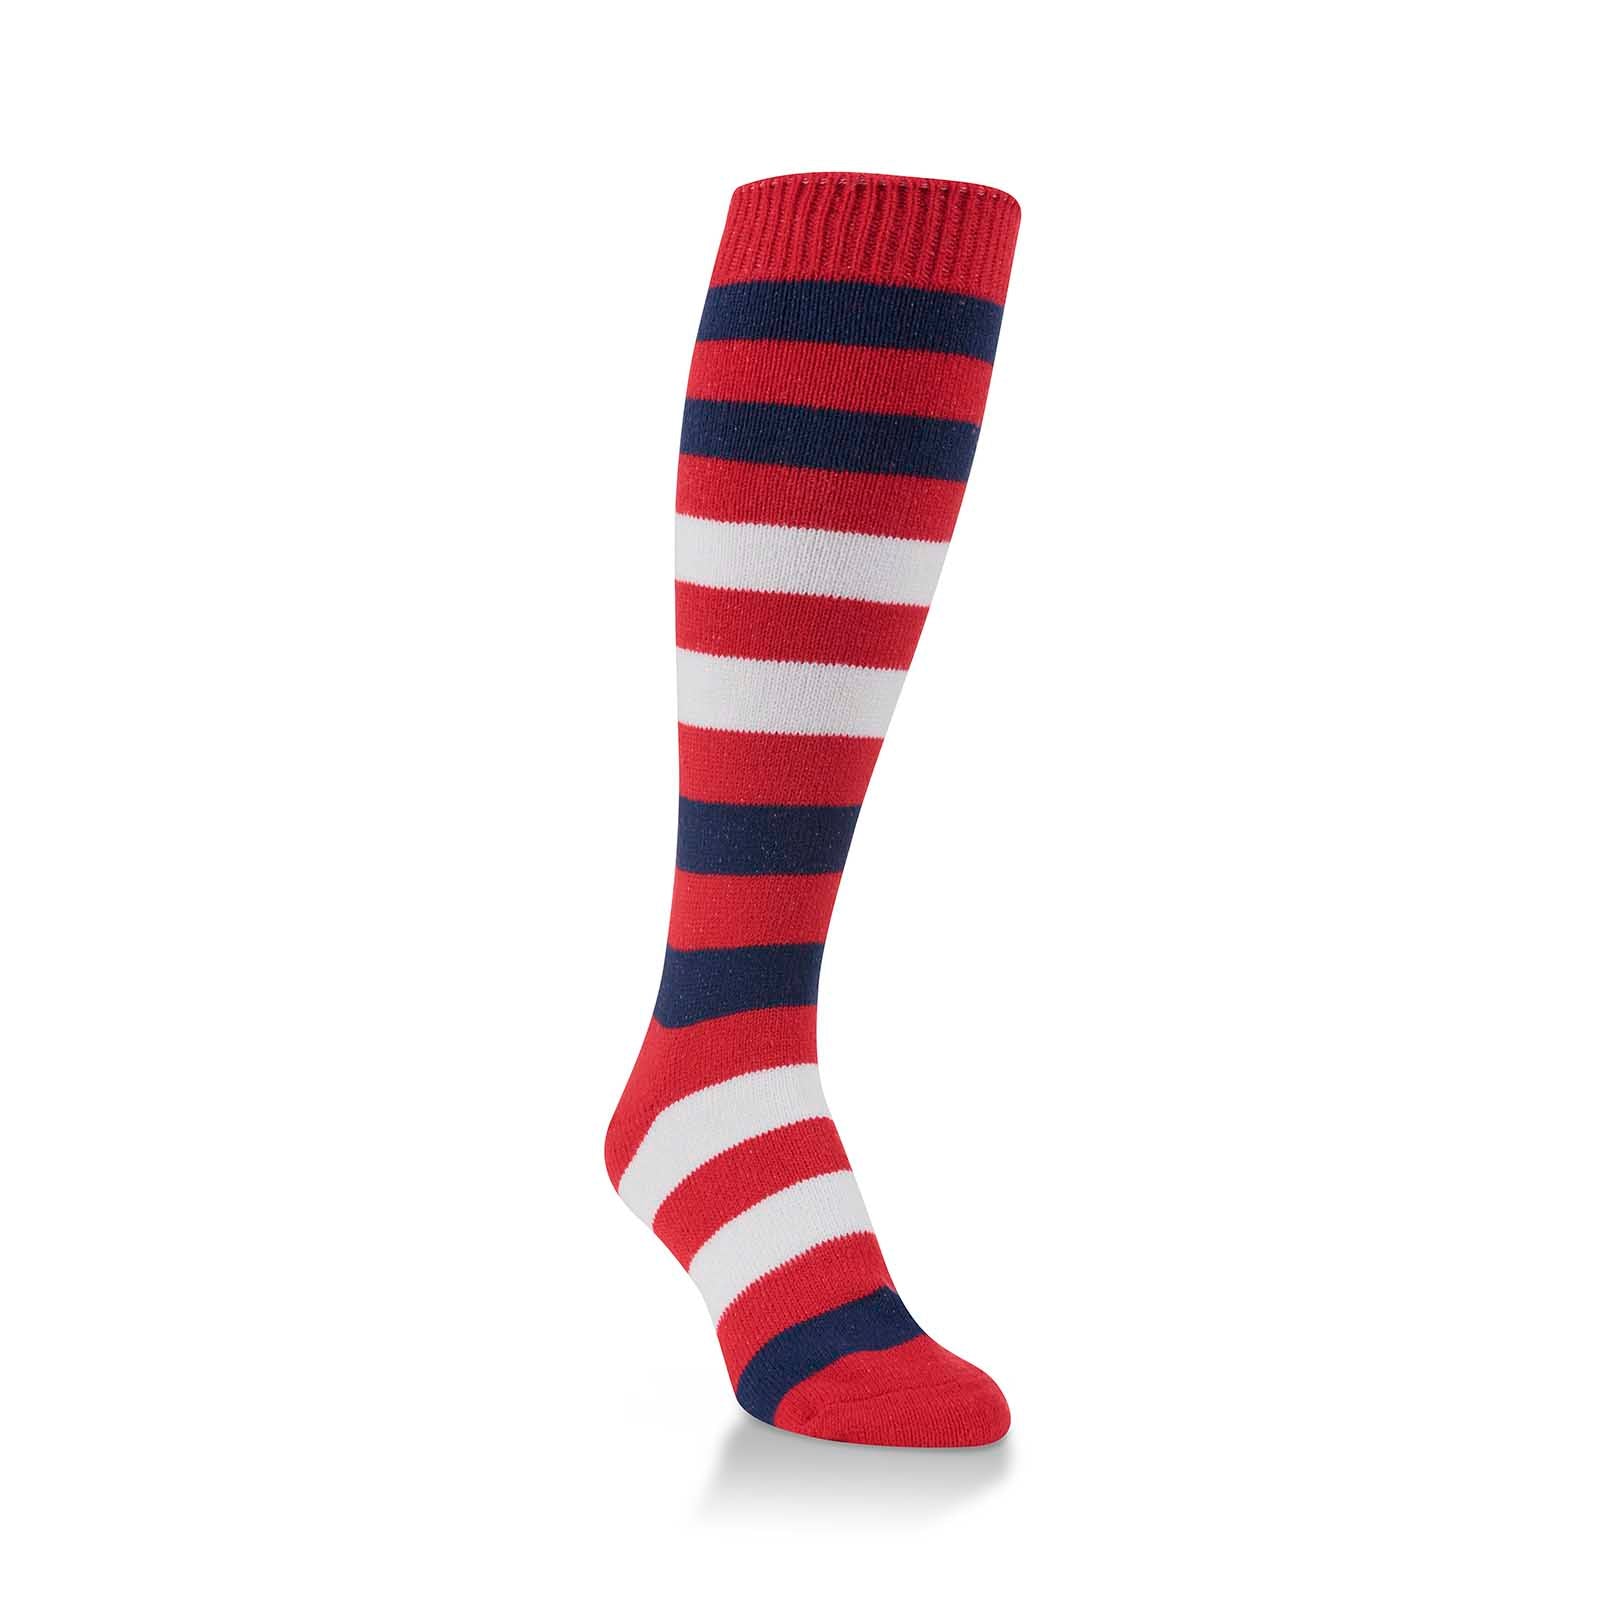 Team Tri-Color Rugby Knee-high Red/Blue/White